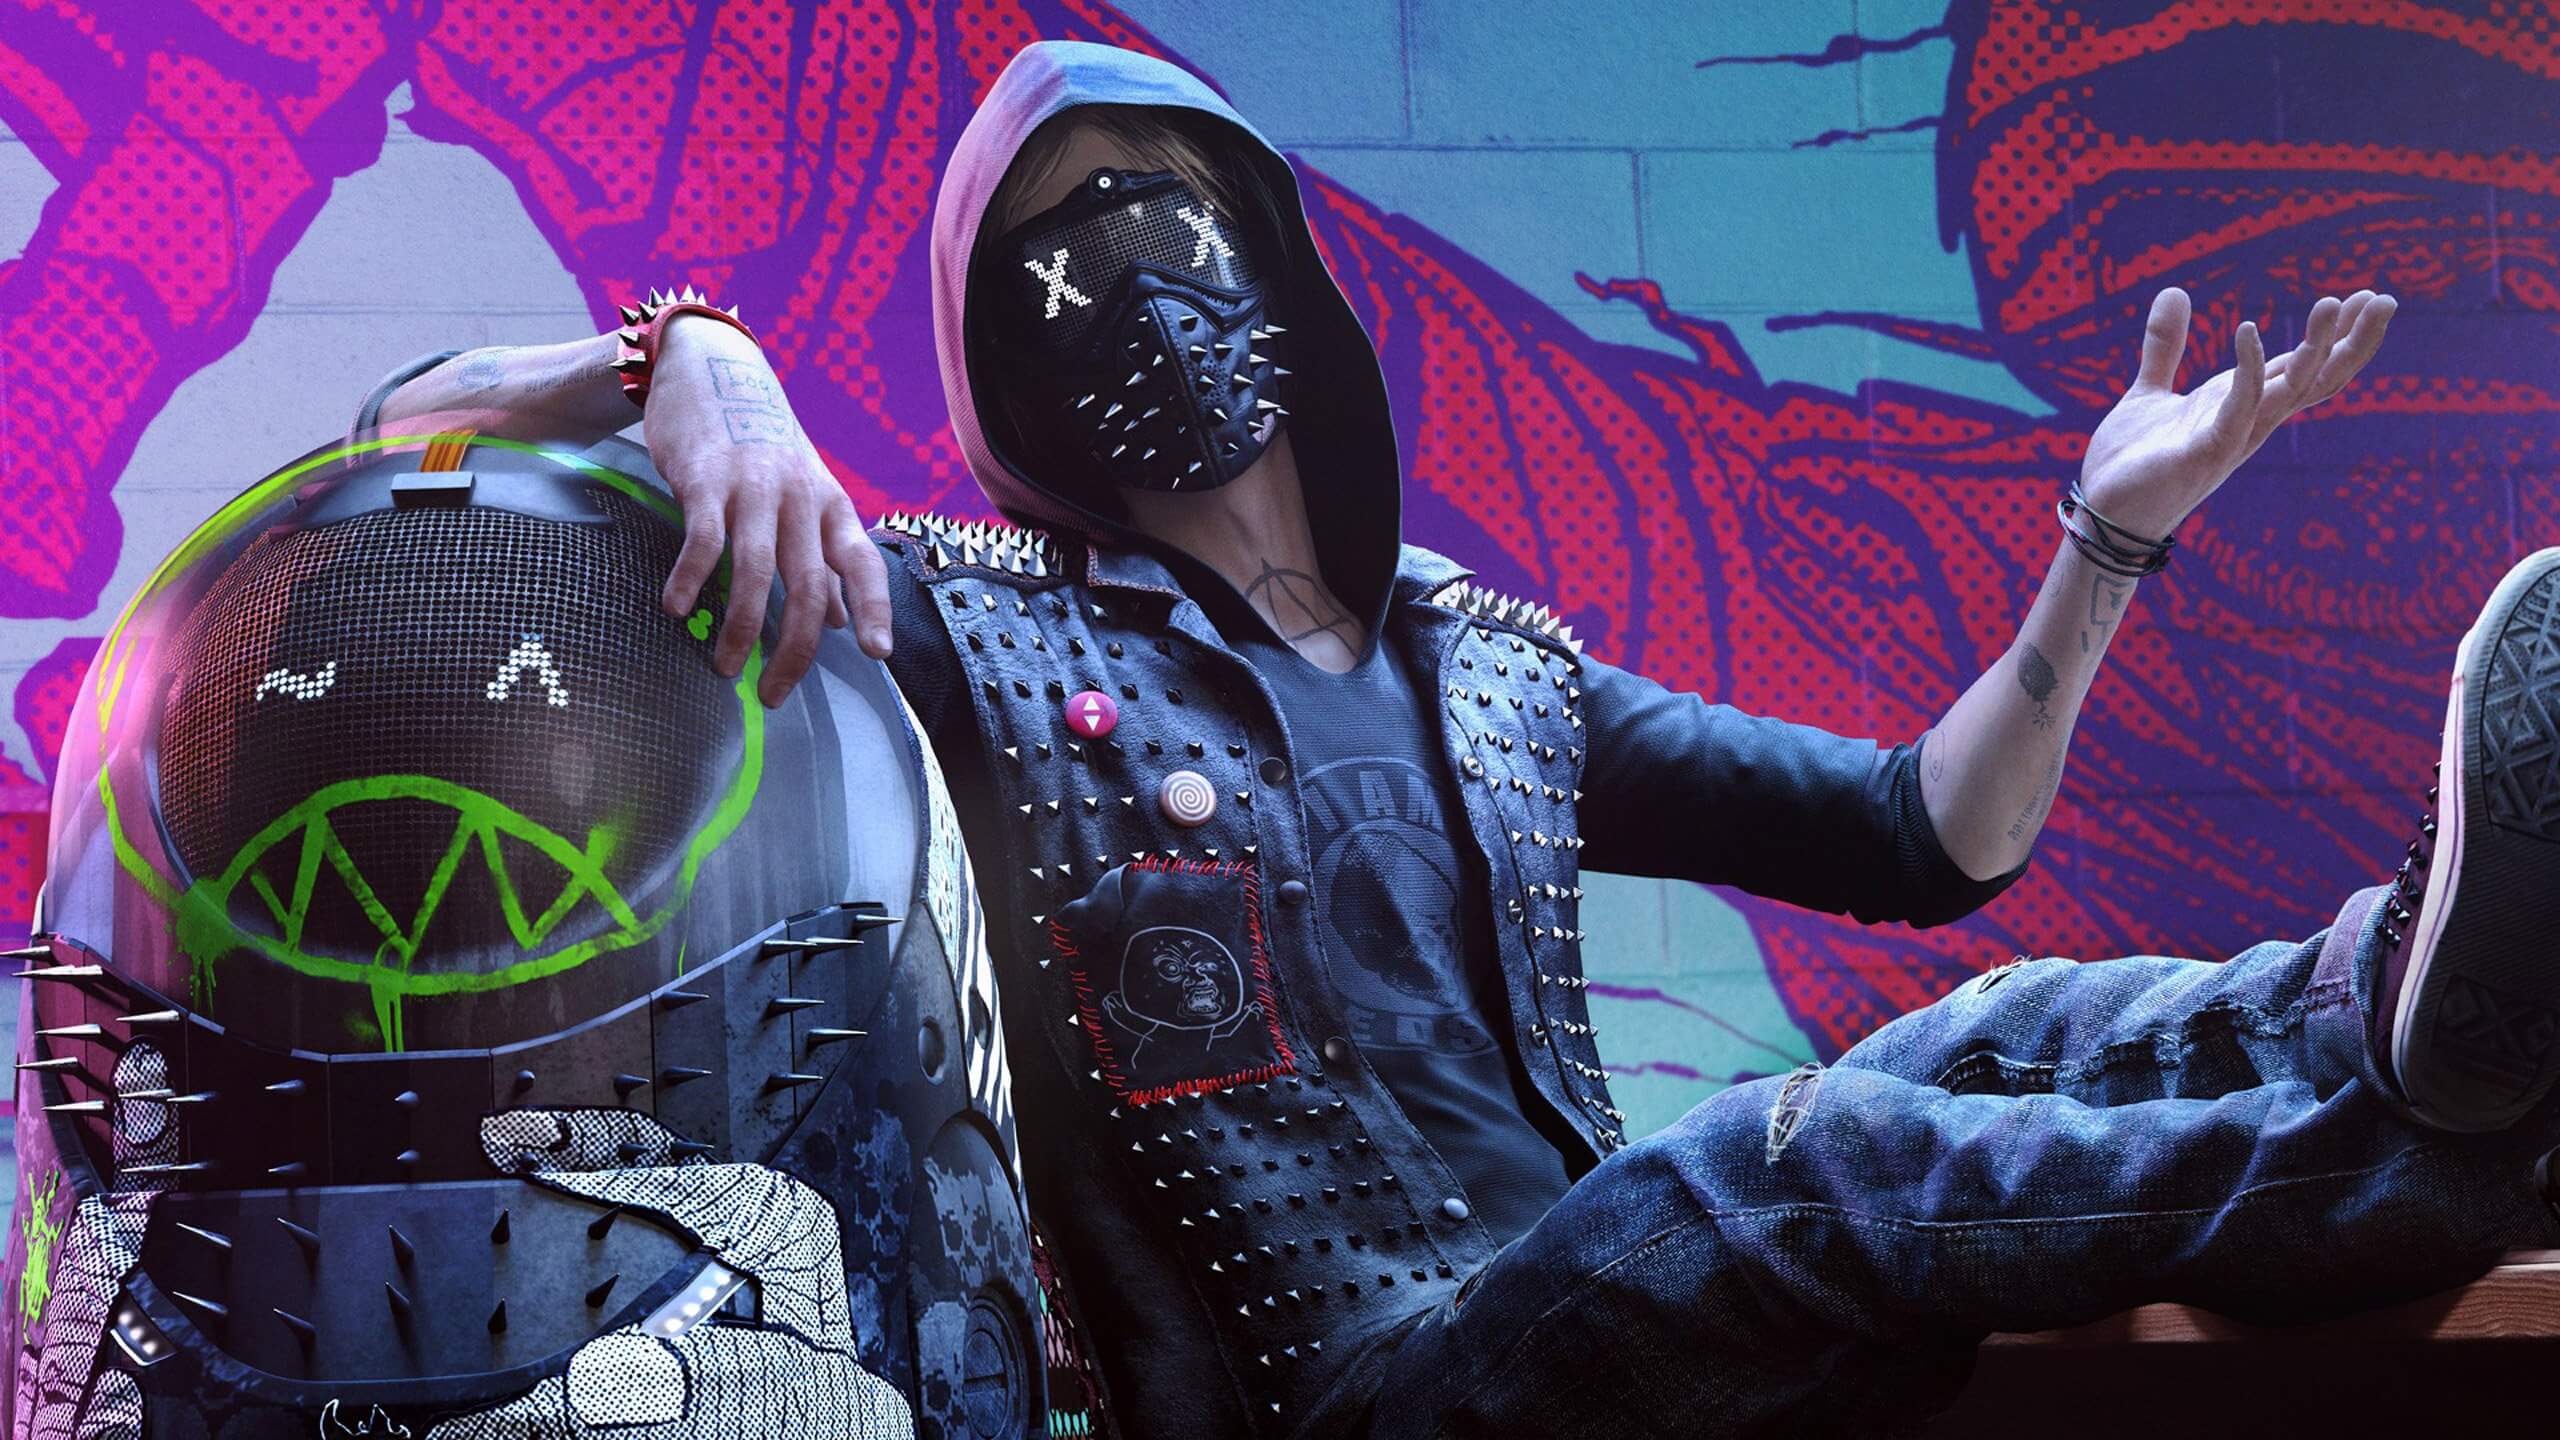 Wrench Watch Dogs 2 4K Wallpaper • GamePhD